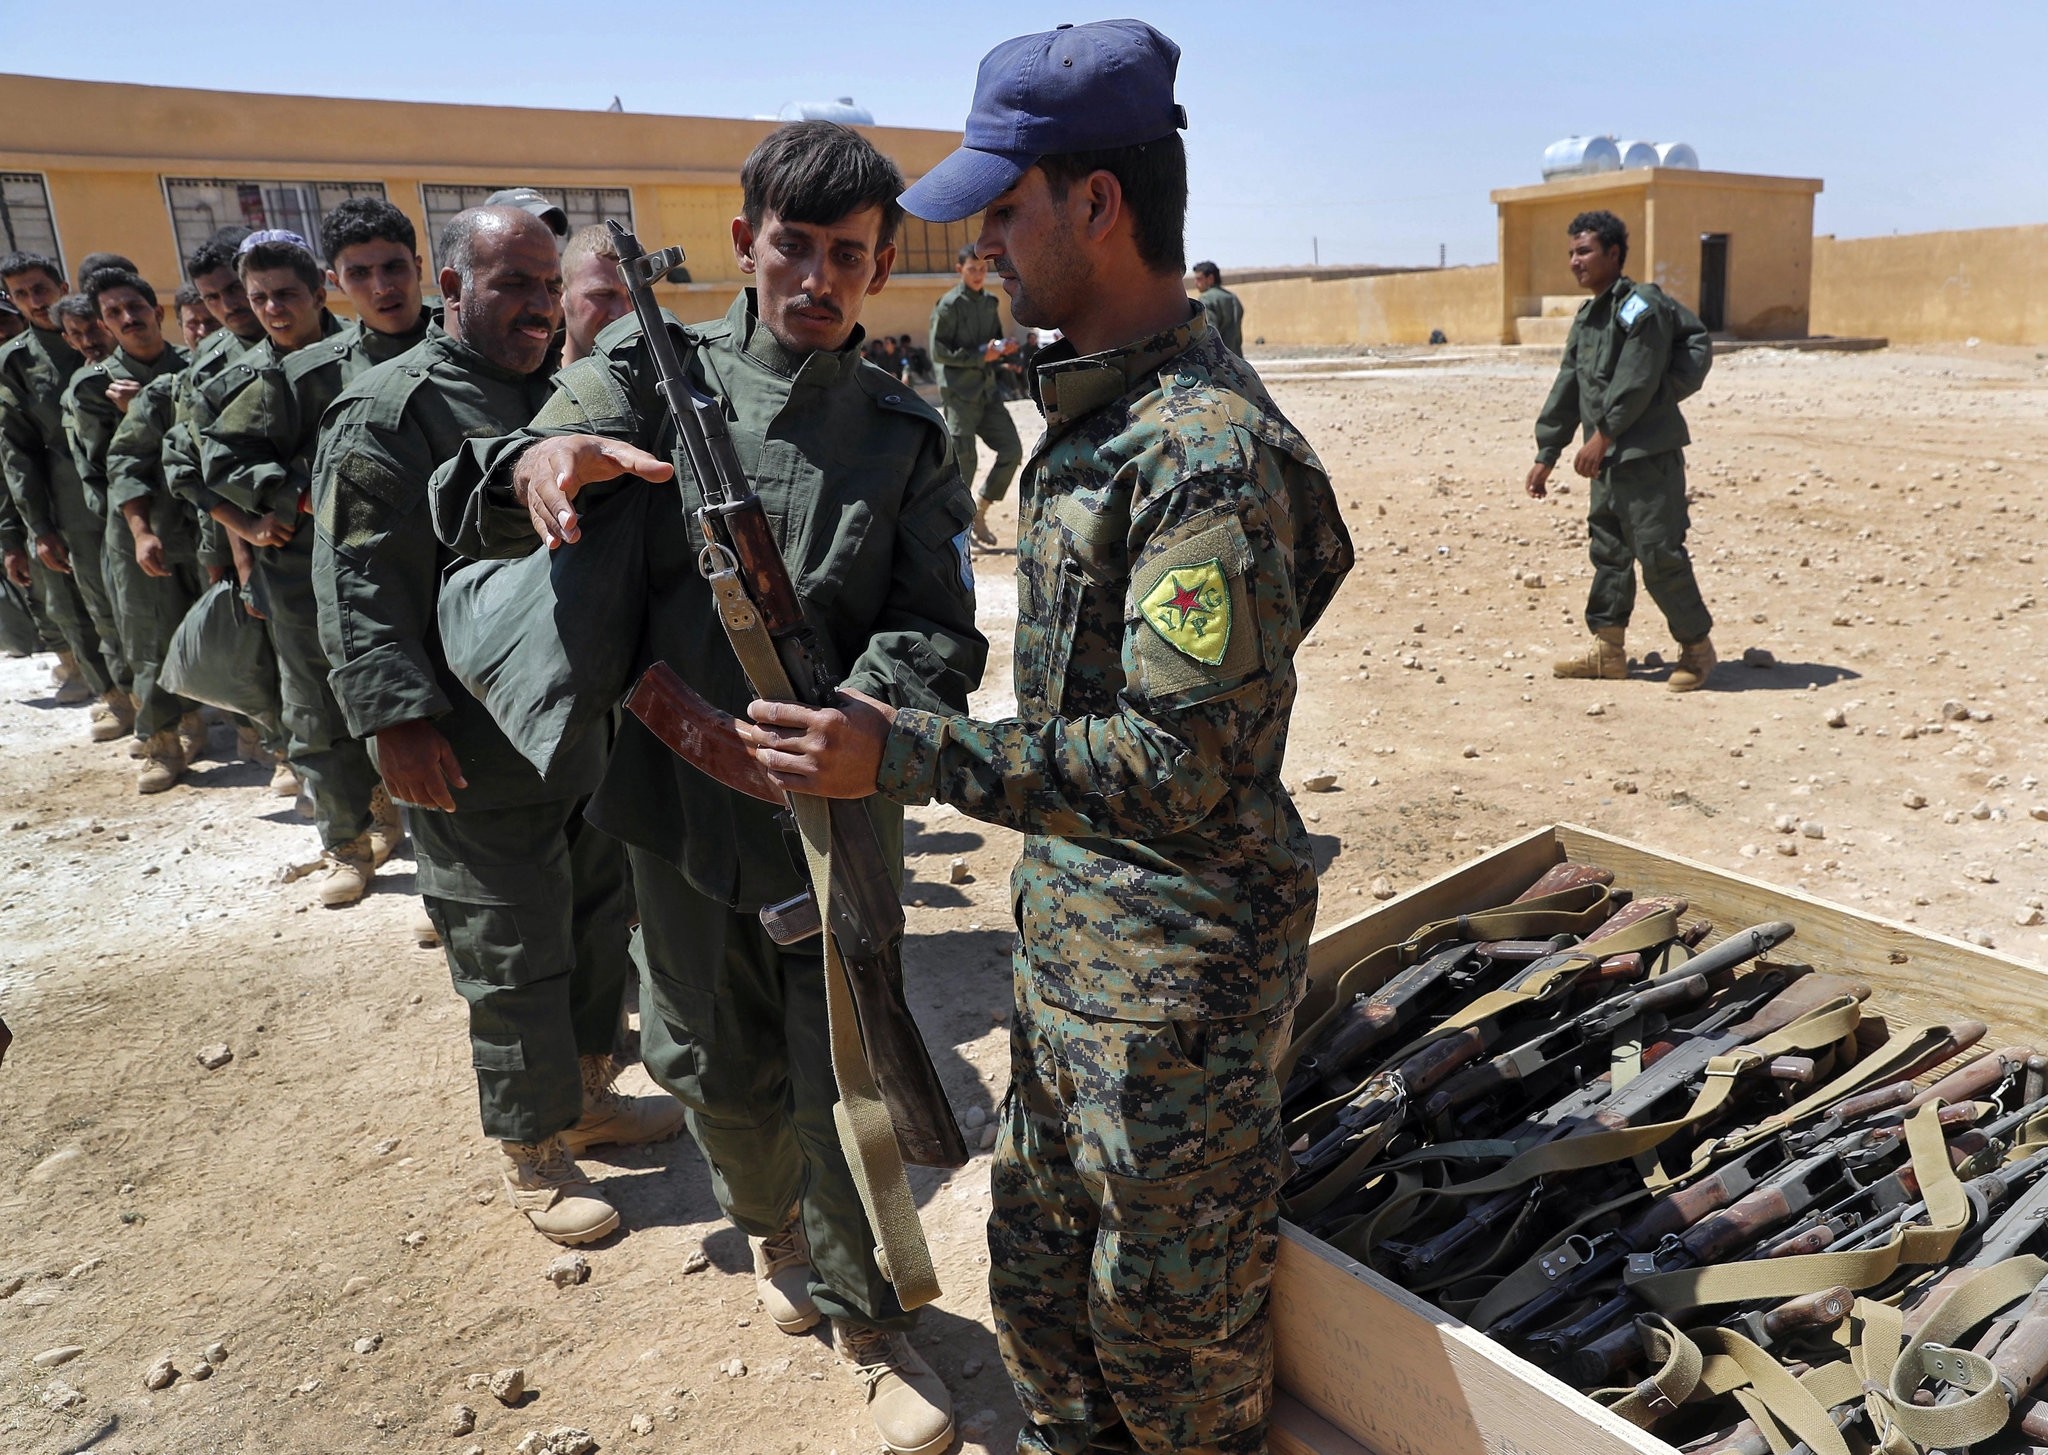 SDF forces receive weapons during their graduation ceremony, at Ain Issa desert base, in Raqqa province, northeast Syria, Thursday, July 20, 2017. (AP Photo)